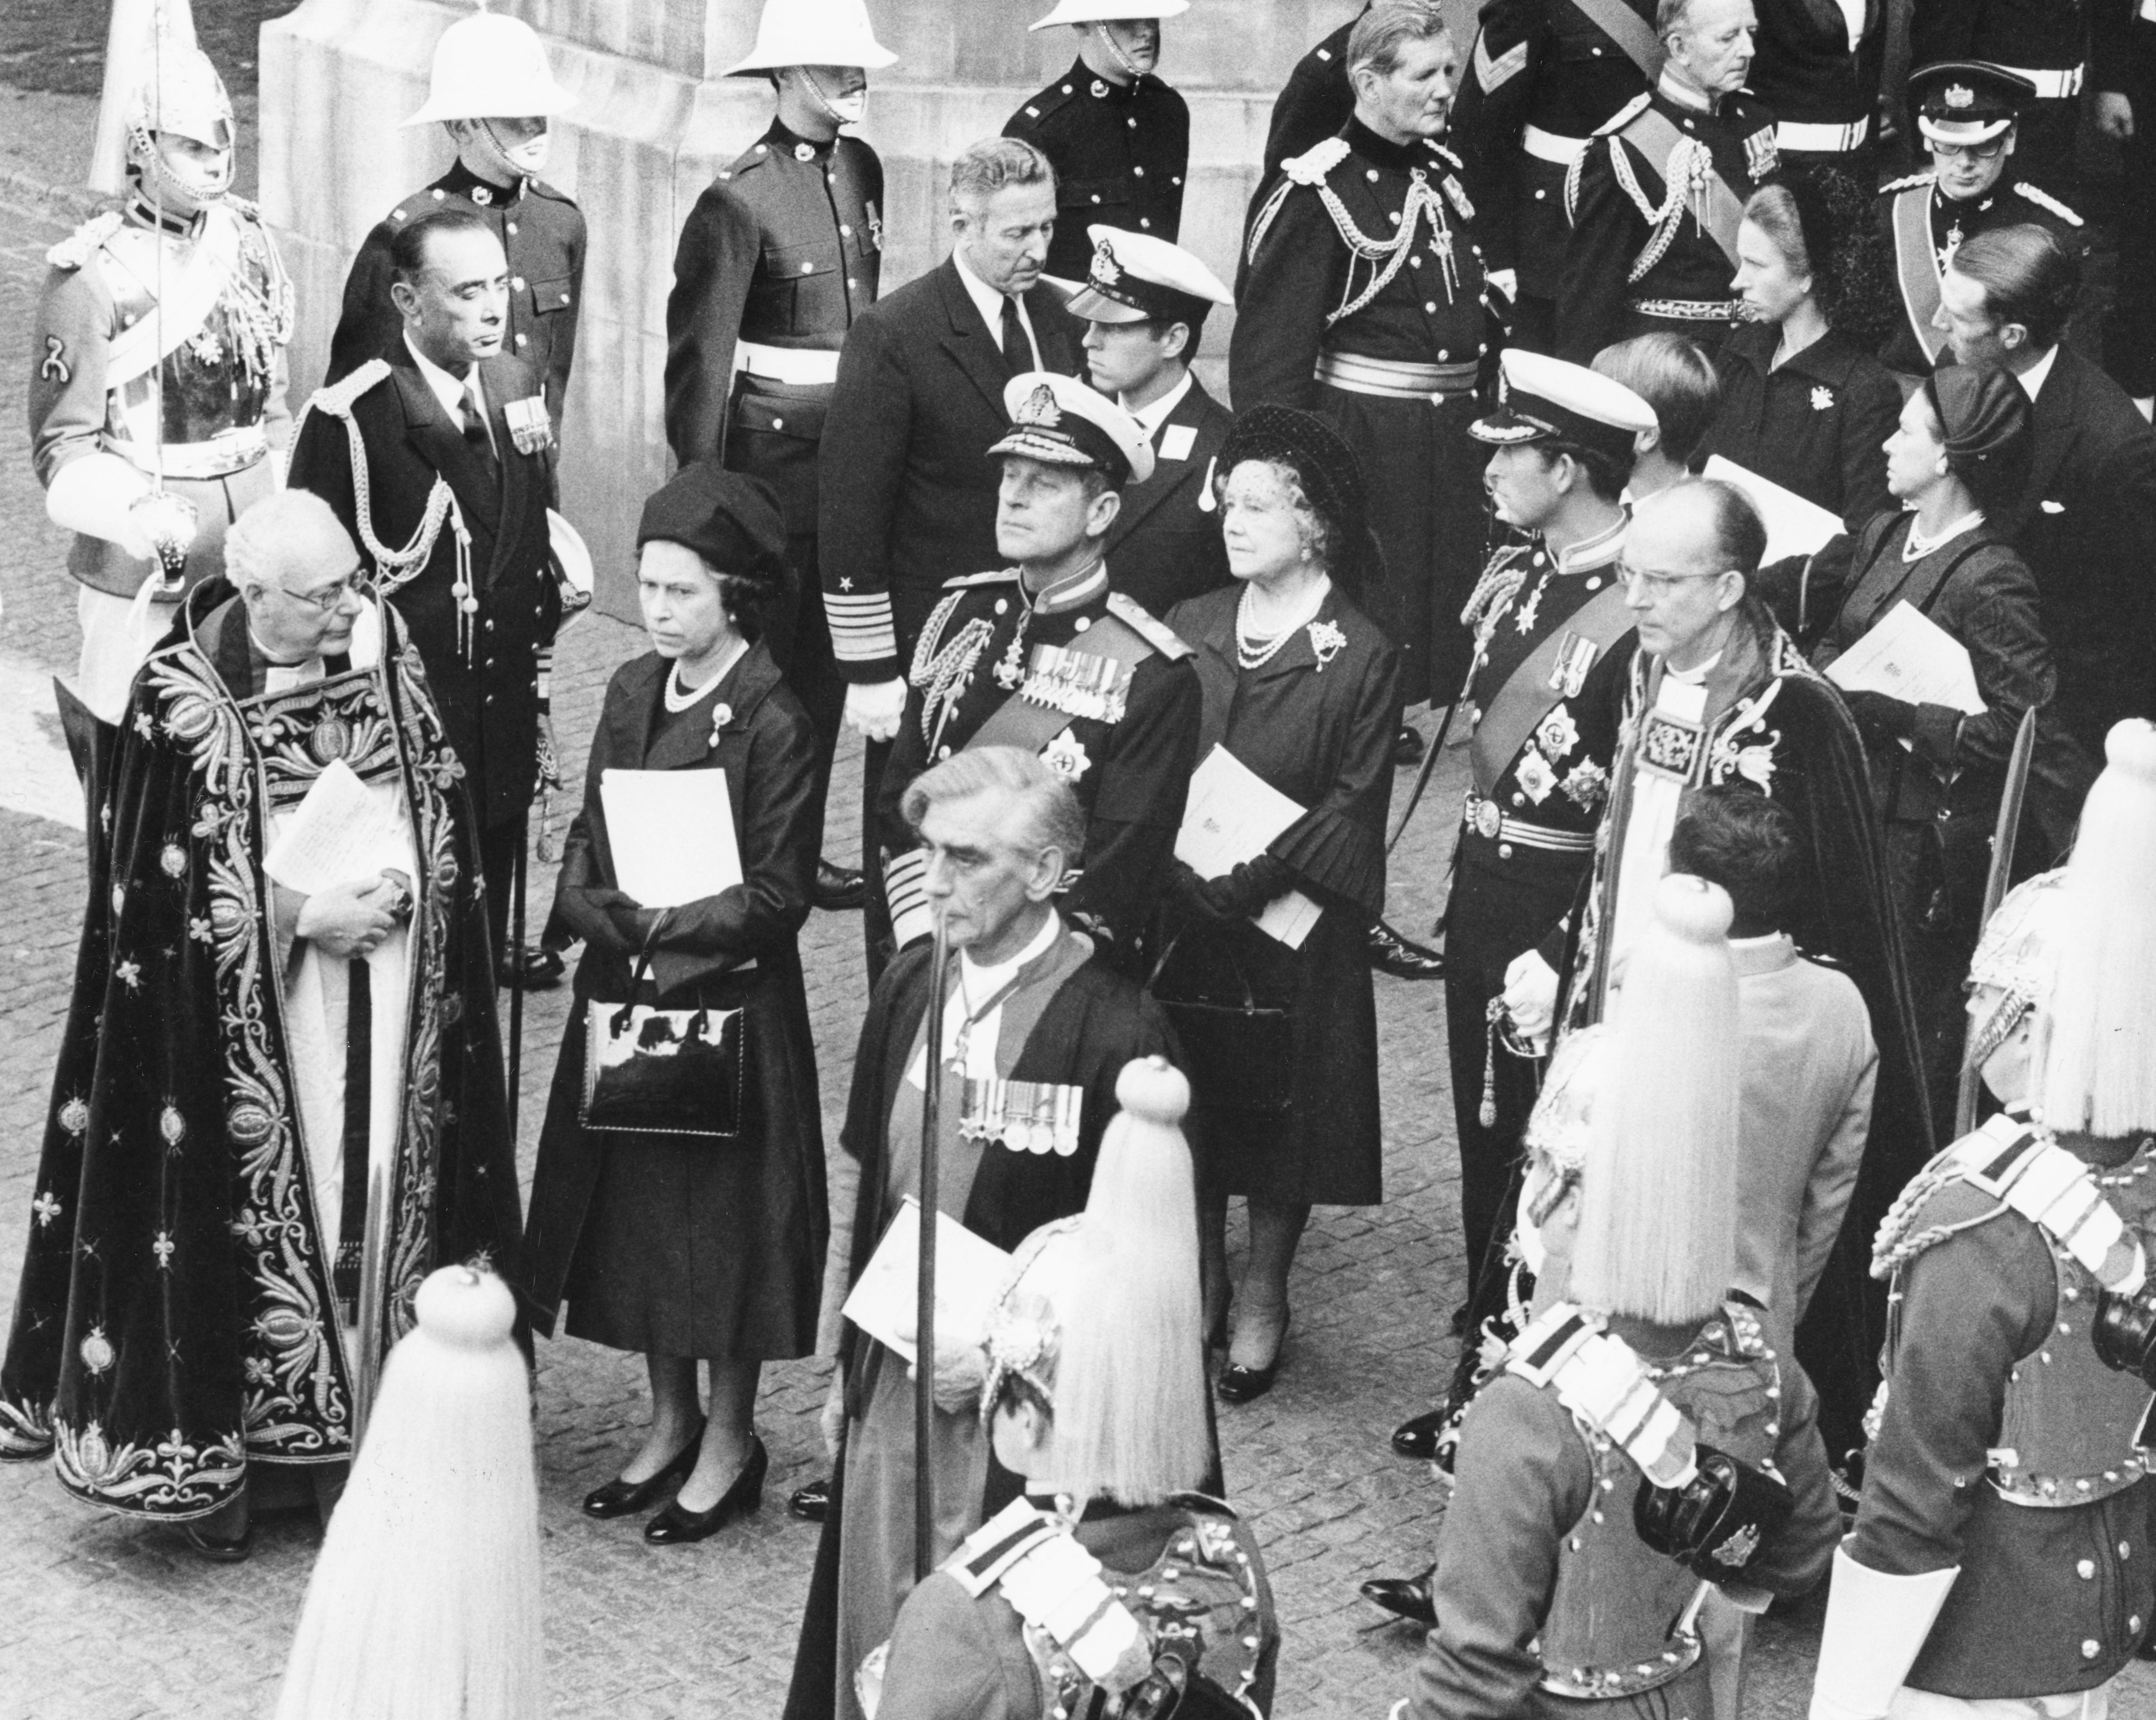 Members of the royal family at Lord Mountbatten’s funeral, 5 September 1979